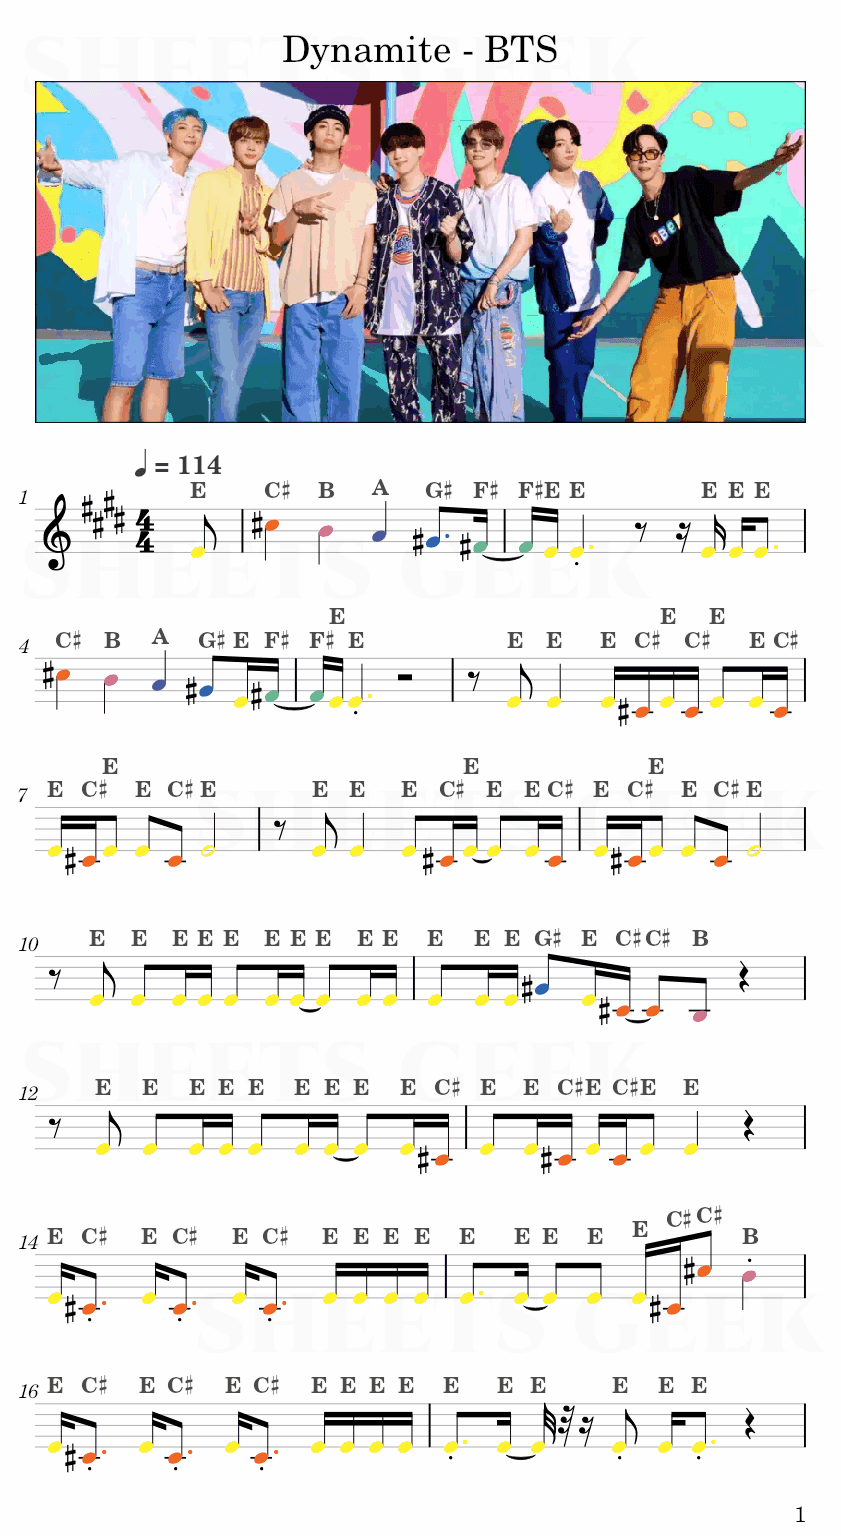 Dynamite - BTS Easy Sheet Music Free for piano, keyboard, flute, violin, sax, cello page 1